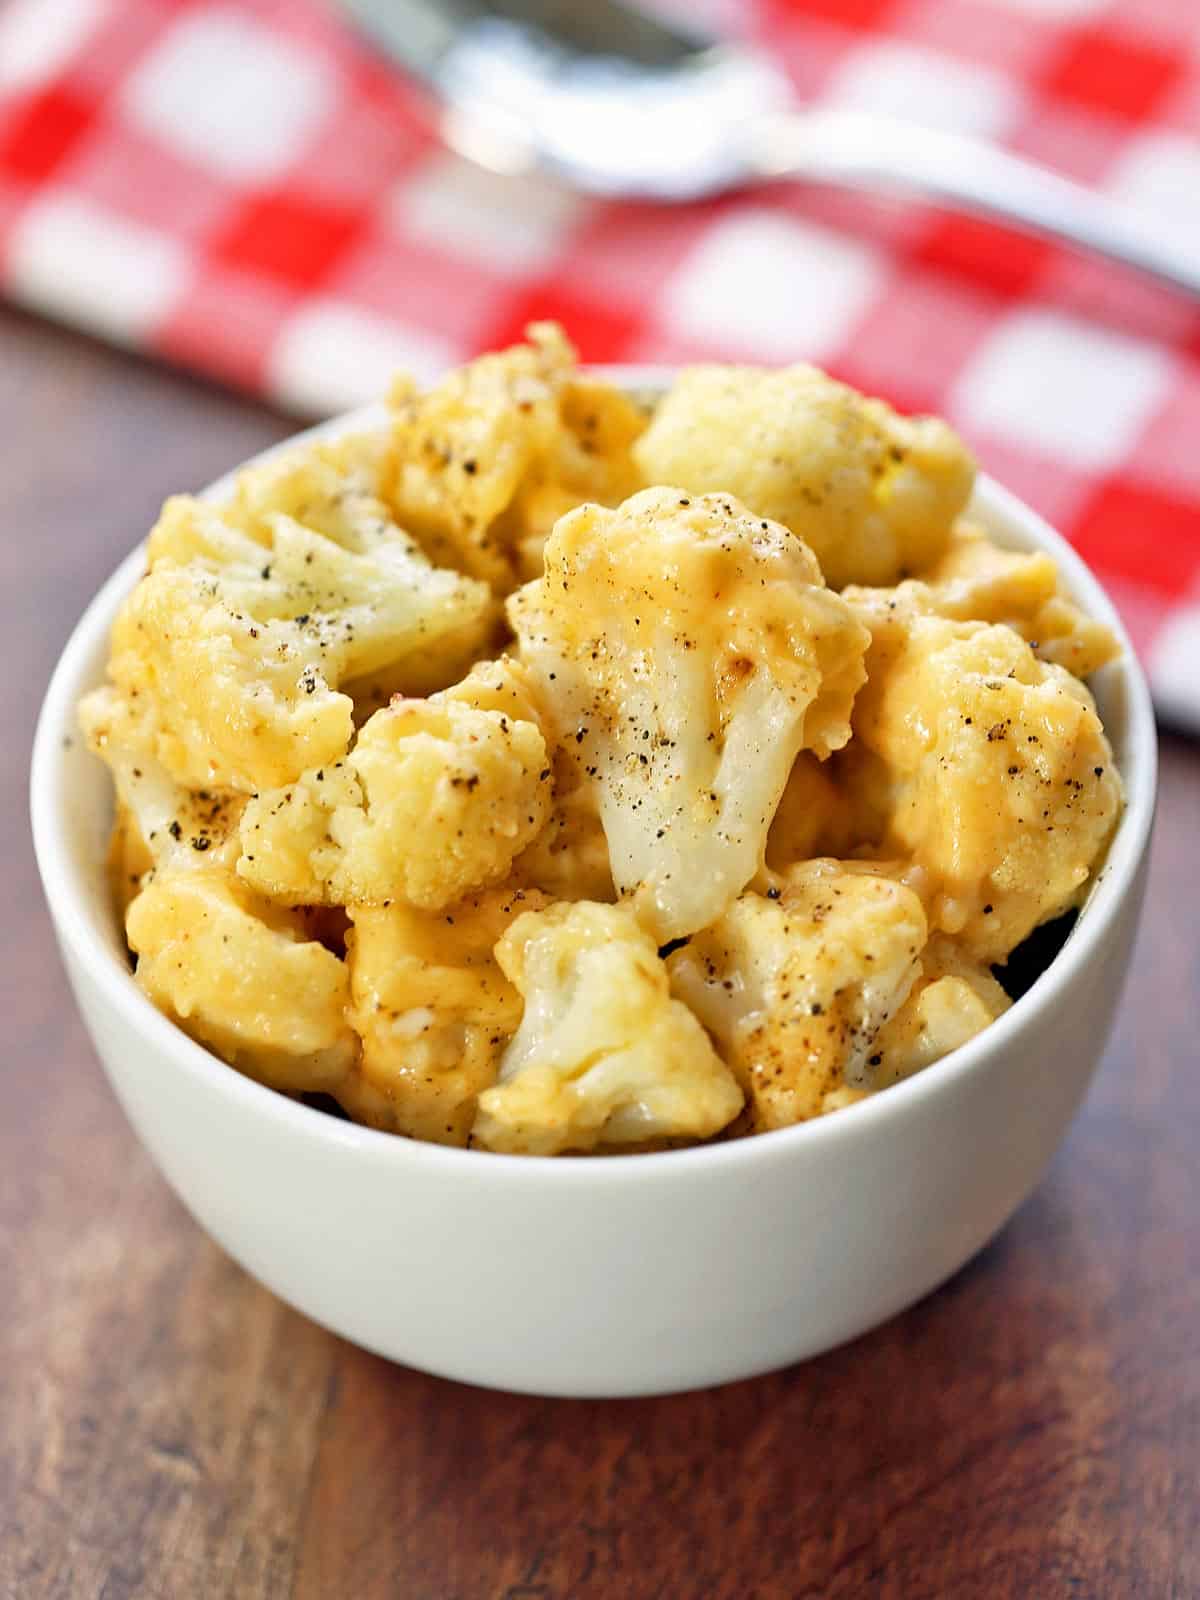 Cauliflower mac and cheese served in a white bowl. 